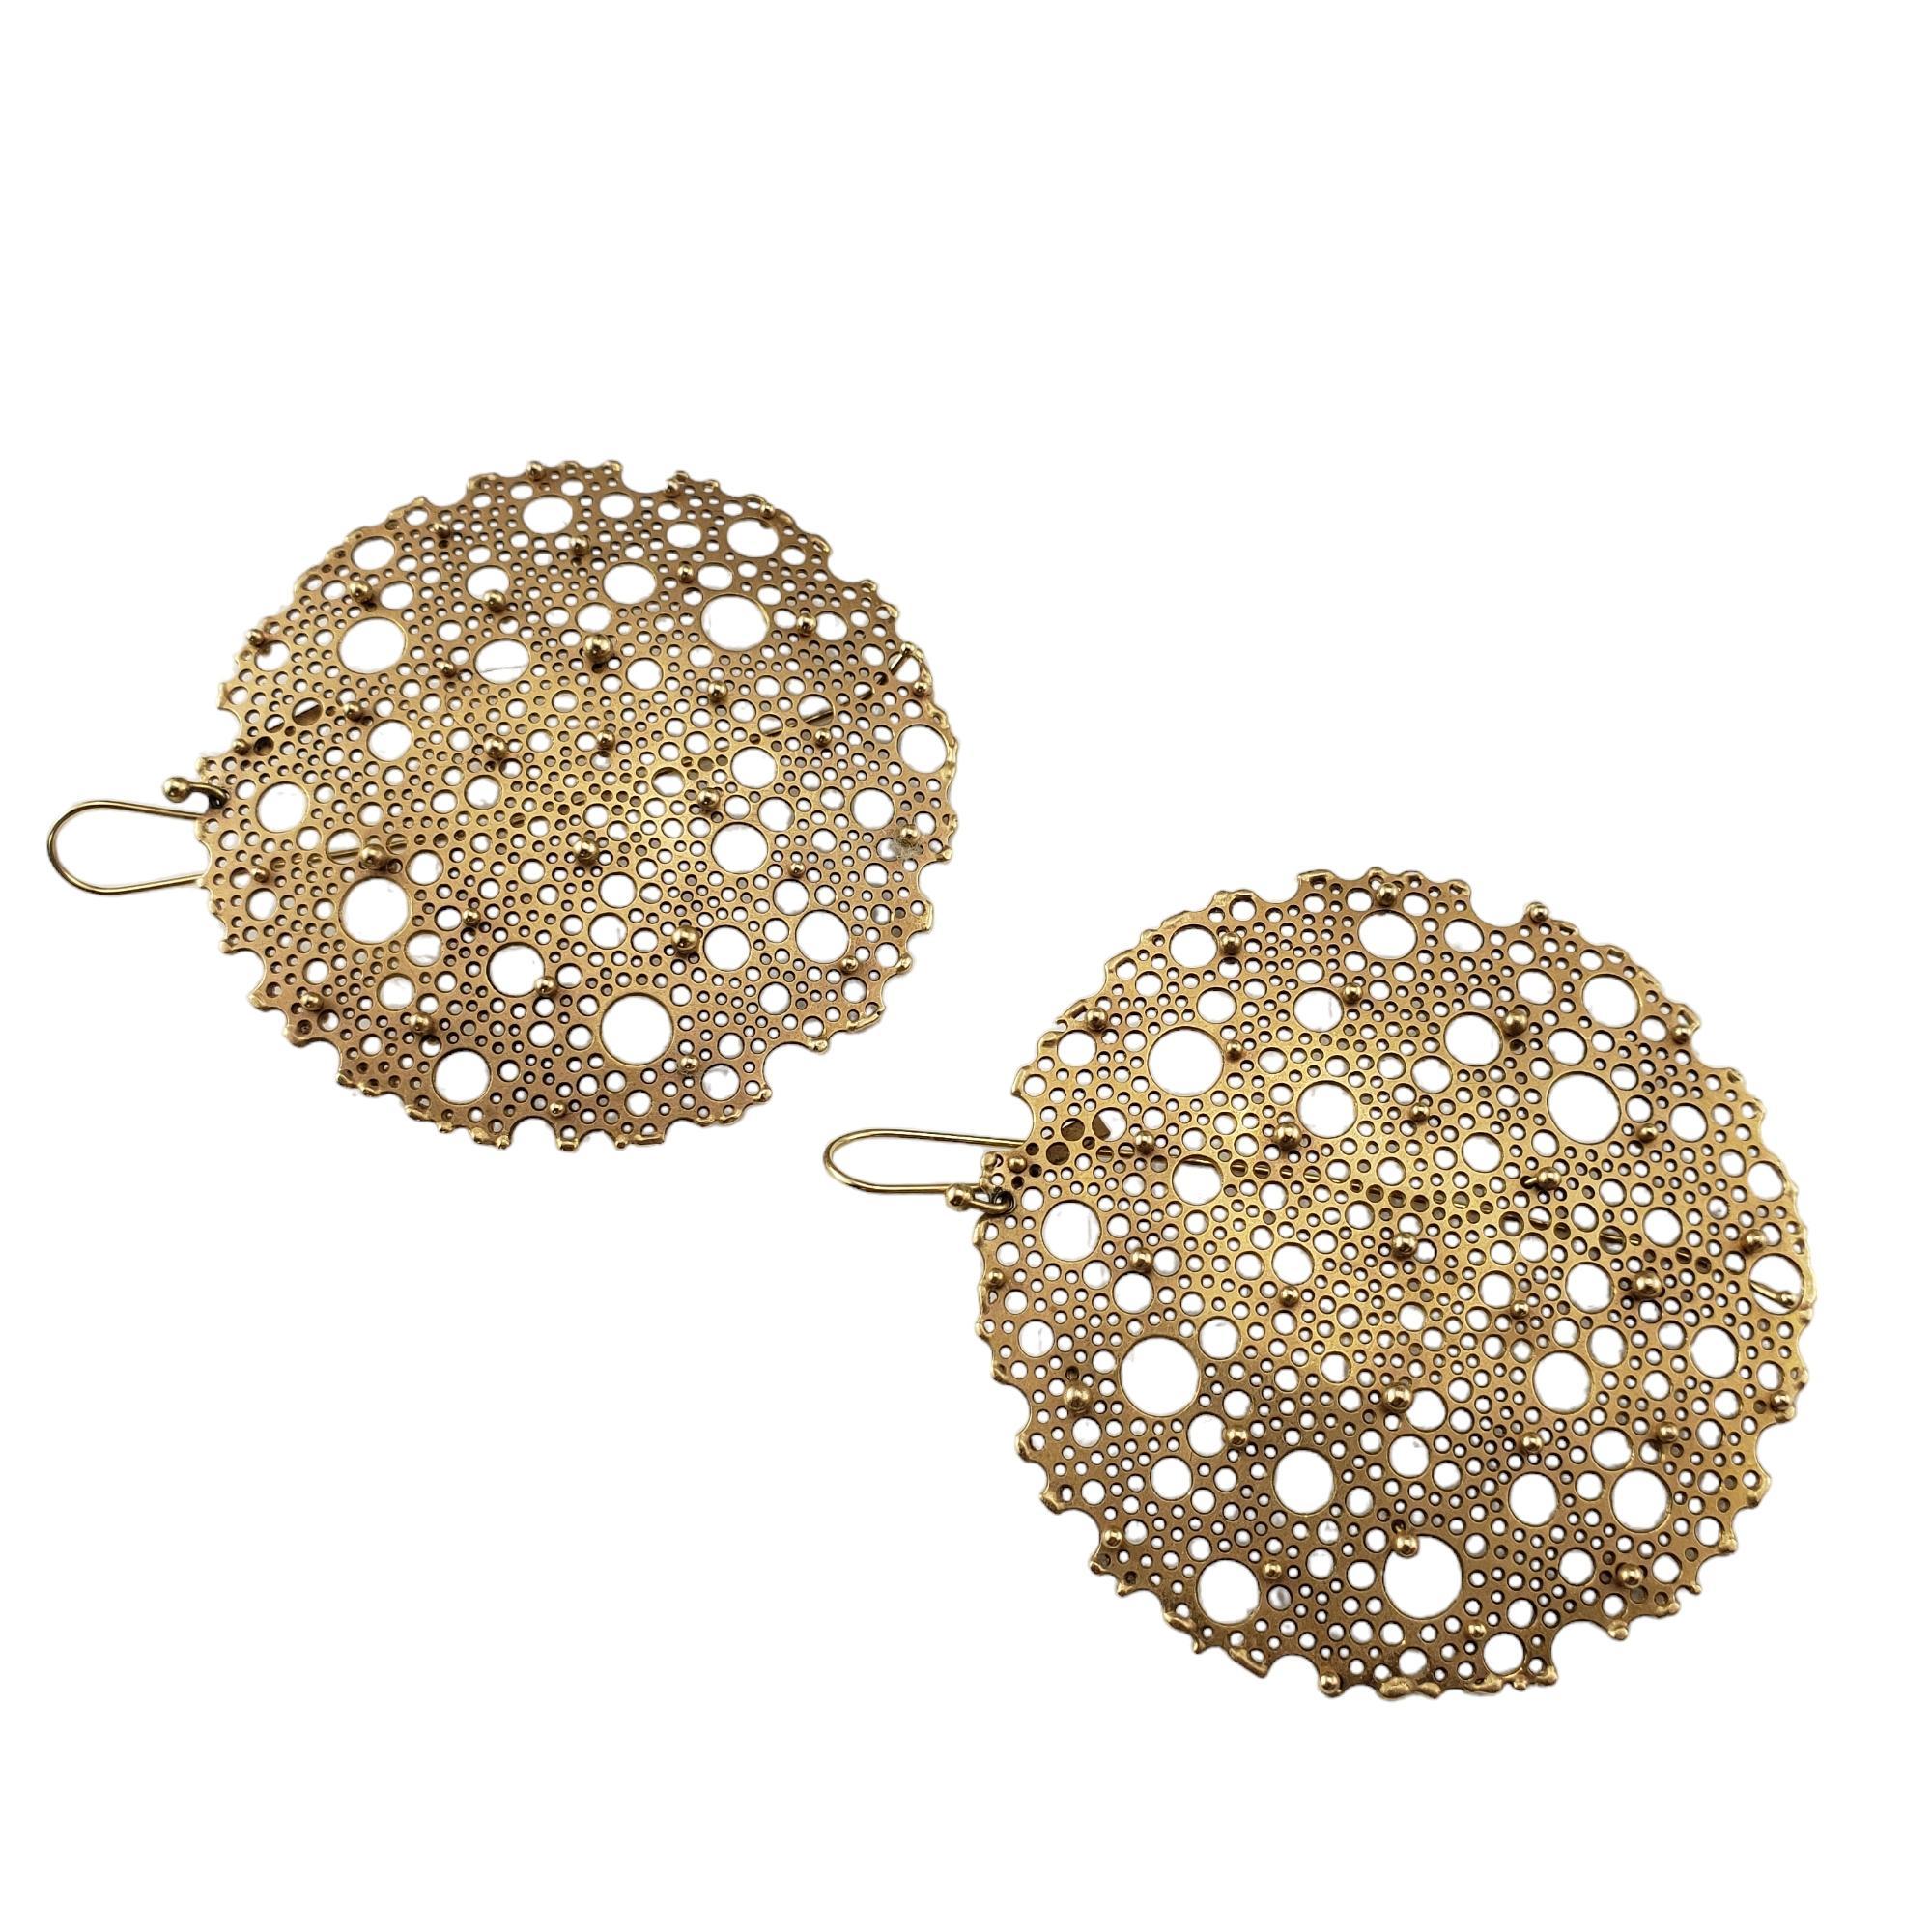 Ted Muehling Queen Anne's Lace 14K Yellow Gold Threader Earrings

These stunning 14K yellow gold earrings by Ted Muehling are crafted in a stunning Queen Anne's lace design.

Size: 1.9 inches 

Hallmark: Muehling

Weight: 7.0 dwt./ 11.0 gr.

Very